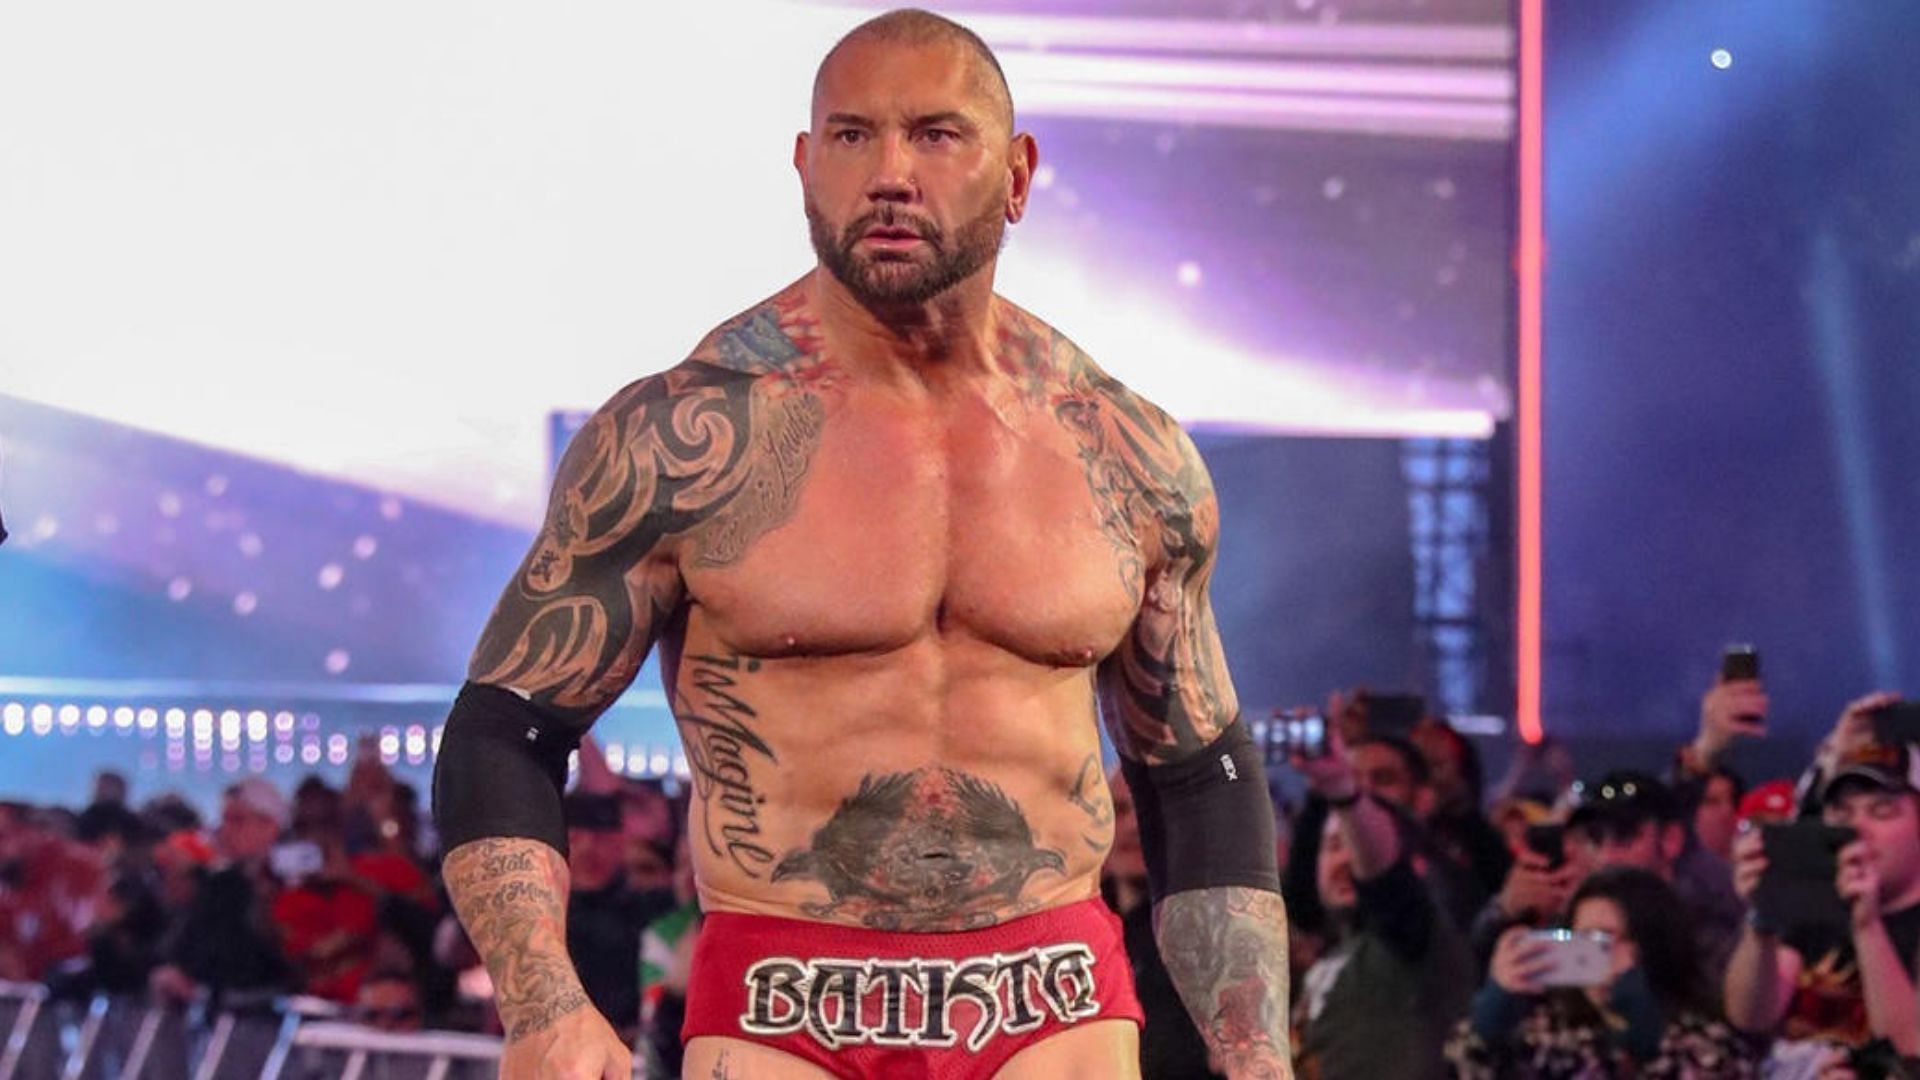 Batista is a 6-time WWE World Champion!